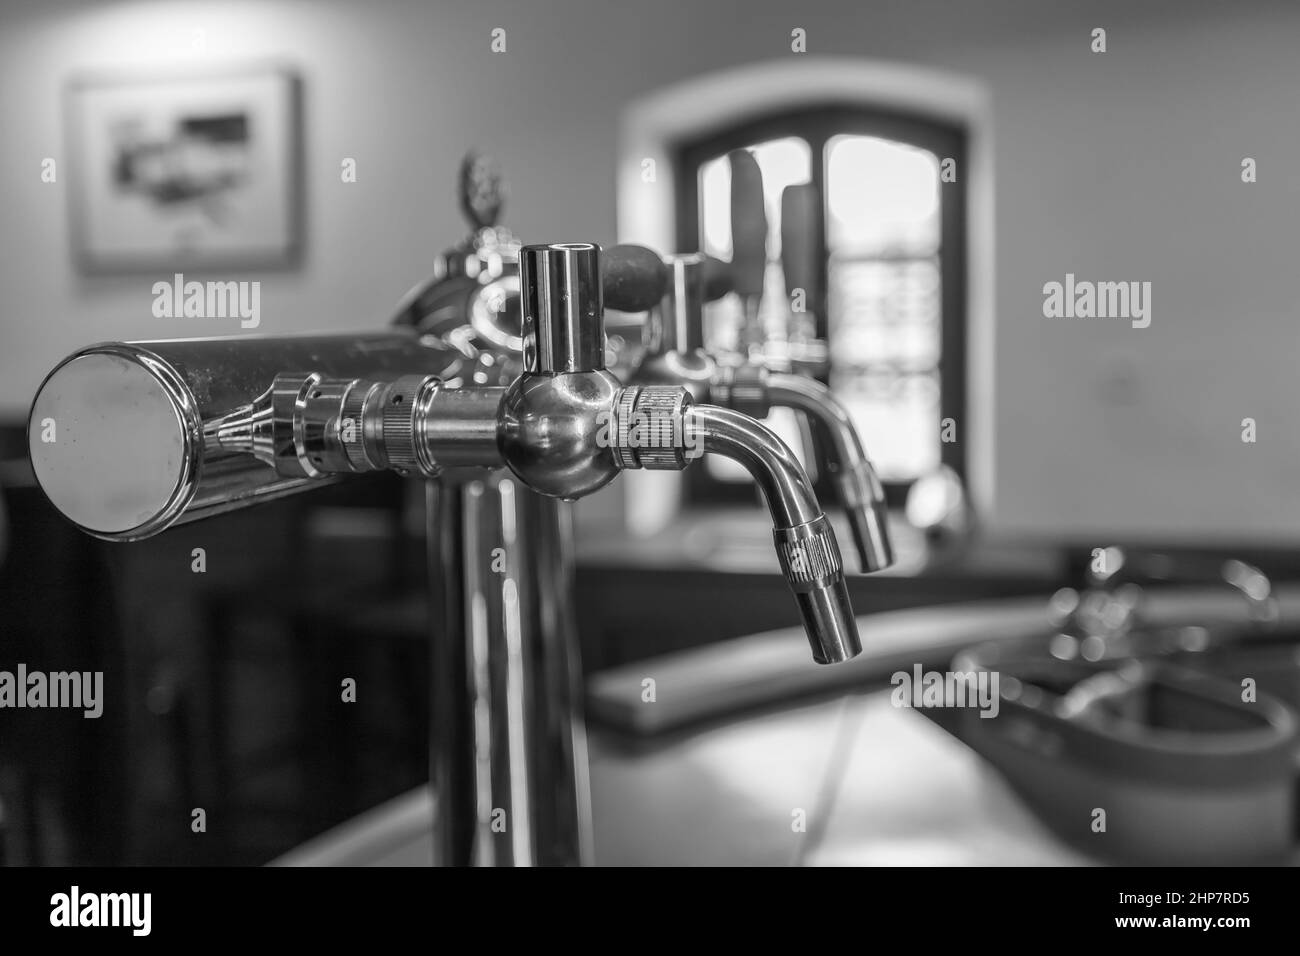 Beer tapping equipment in a restaurant. The background is blurred. Stock Photo